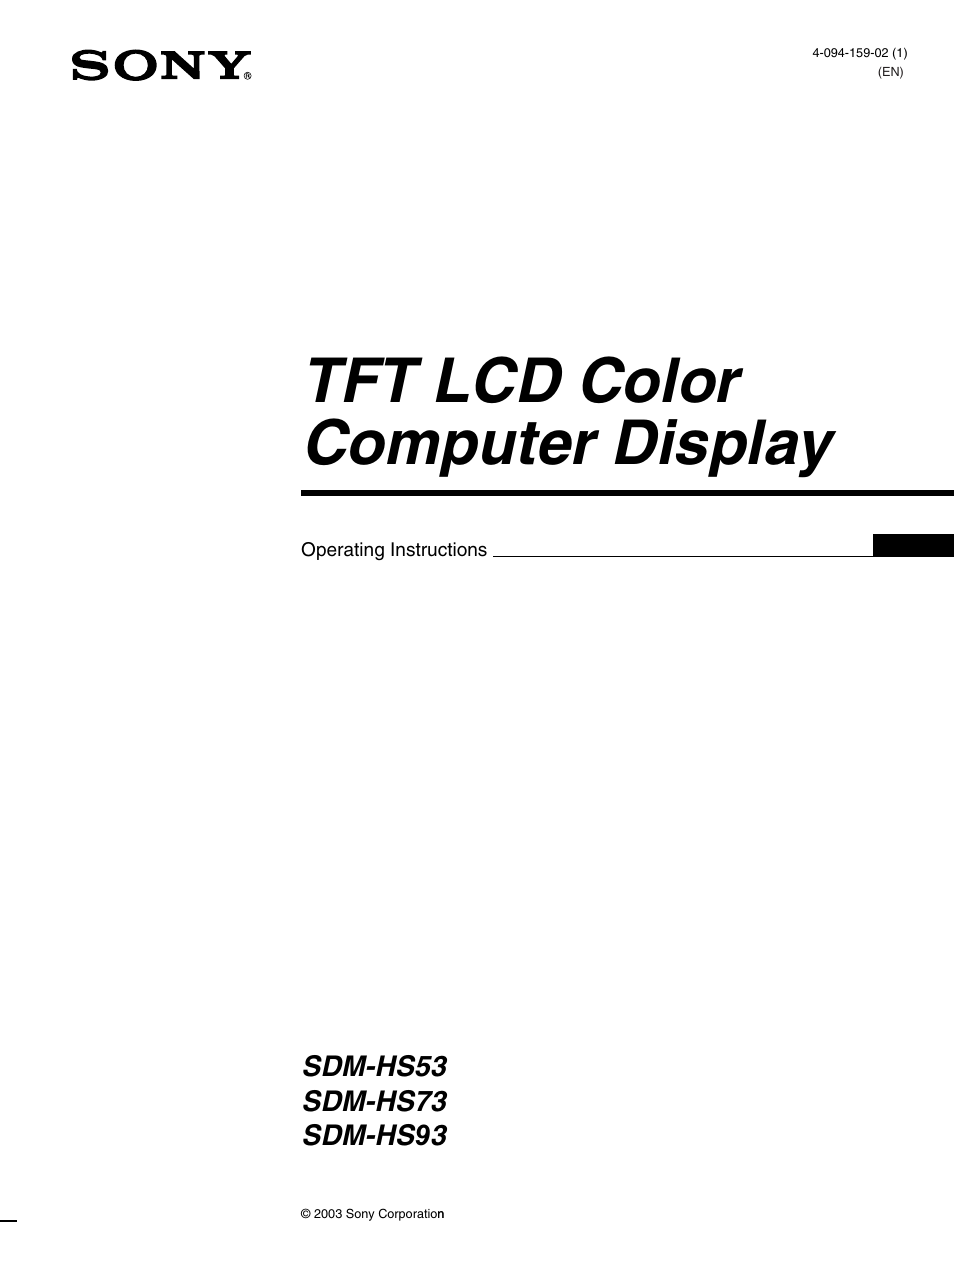 Sony SDM-HS93 User Manual | 19 pages